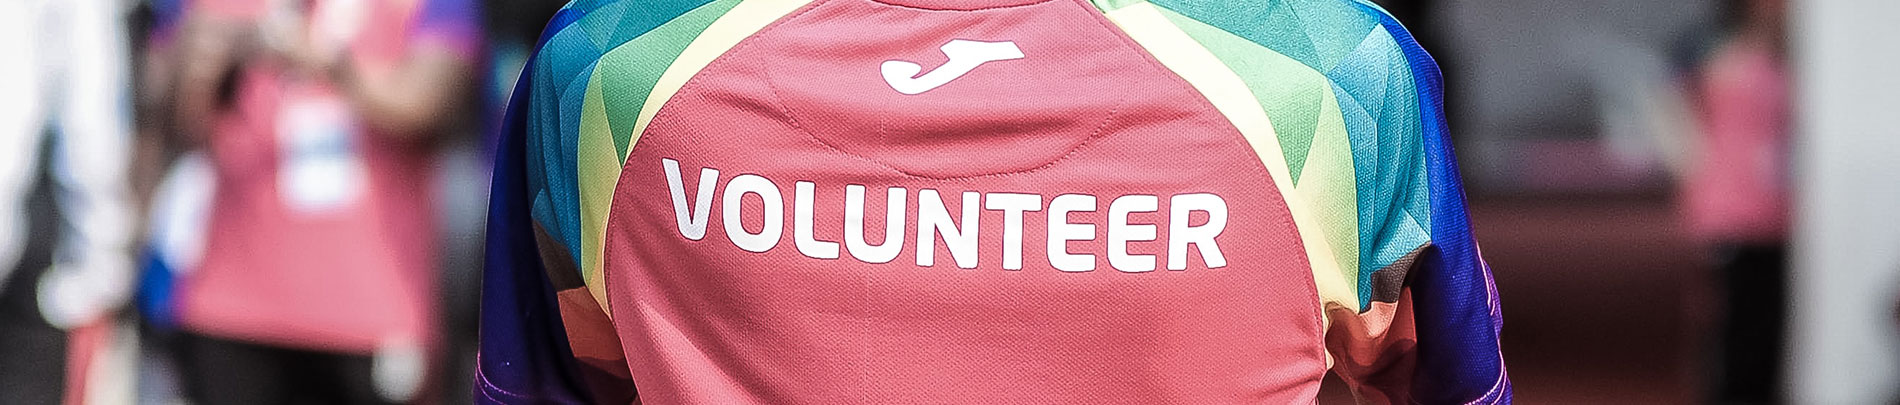 A person wearing a colourful t-shirt that says volunteer across the back.